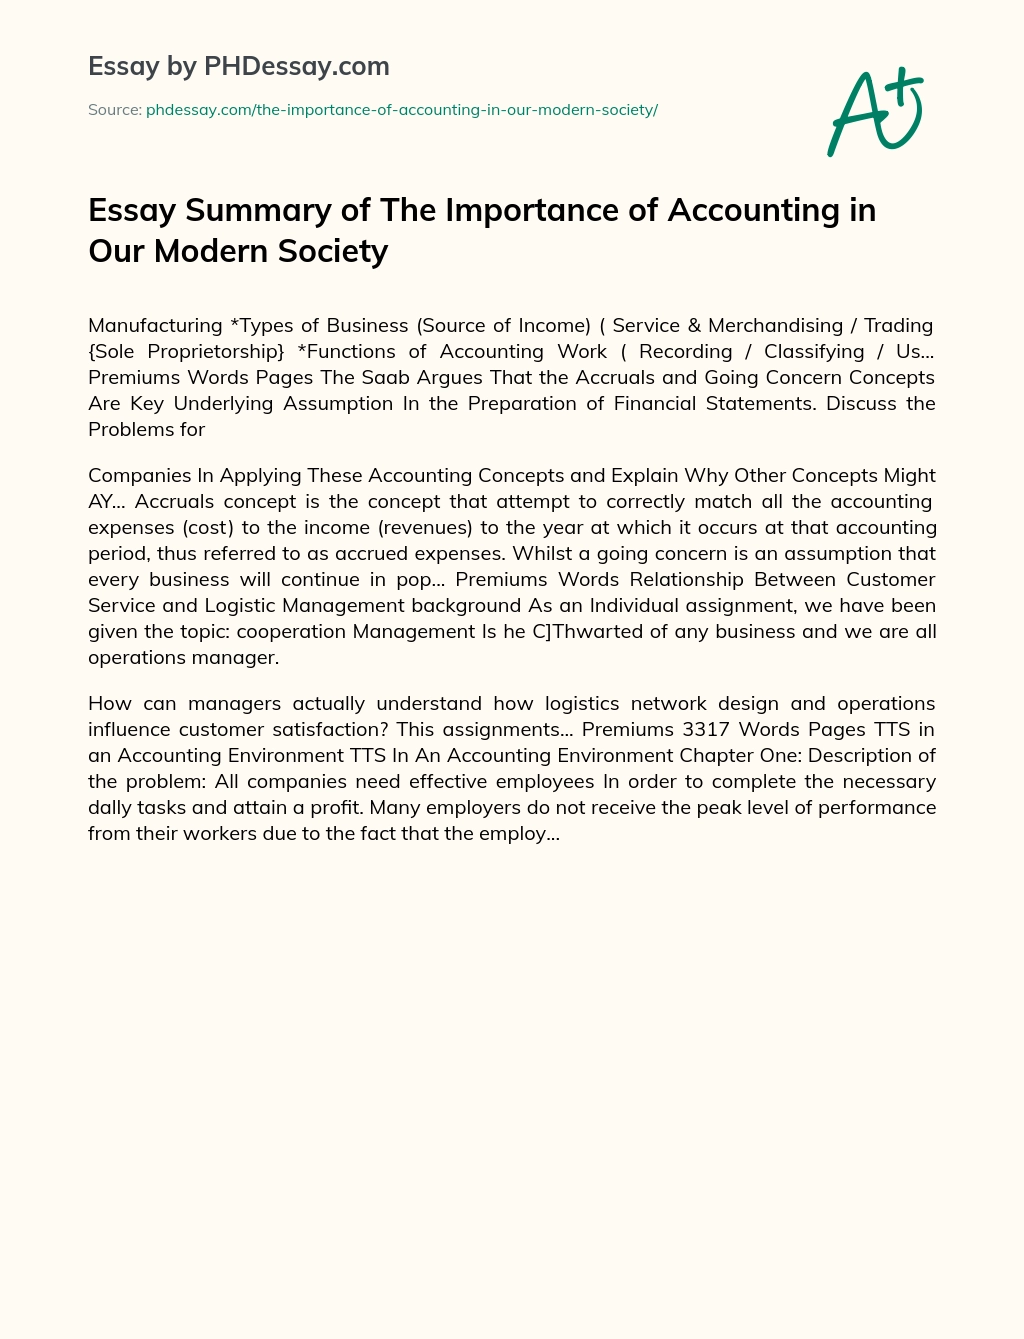 Essay Summary of The Importance of Accounting in Our Modern Society essay